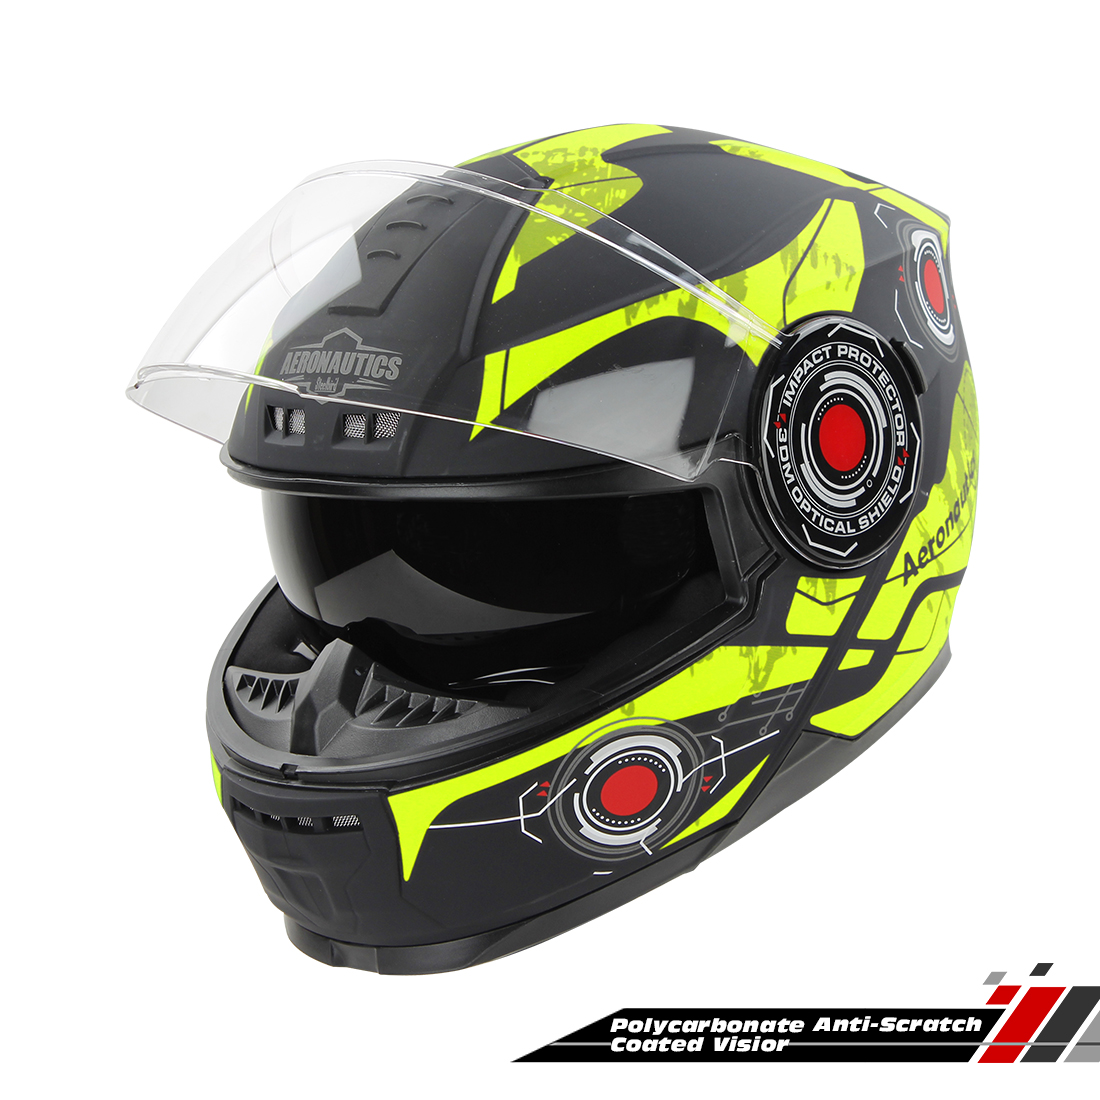 Steelbird SBH-40 Cyber ISI Certified Full Face Graphic Helmet For Men And Women With Inner Sun Shield (Glossy Black Neon)